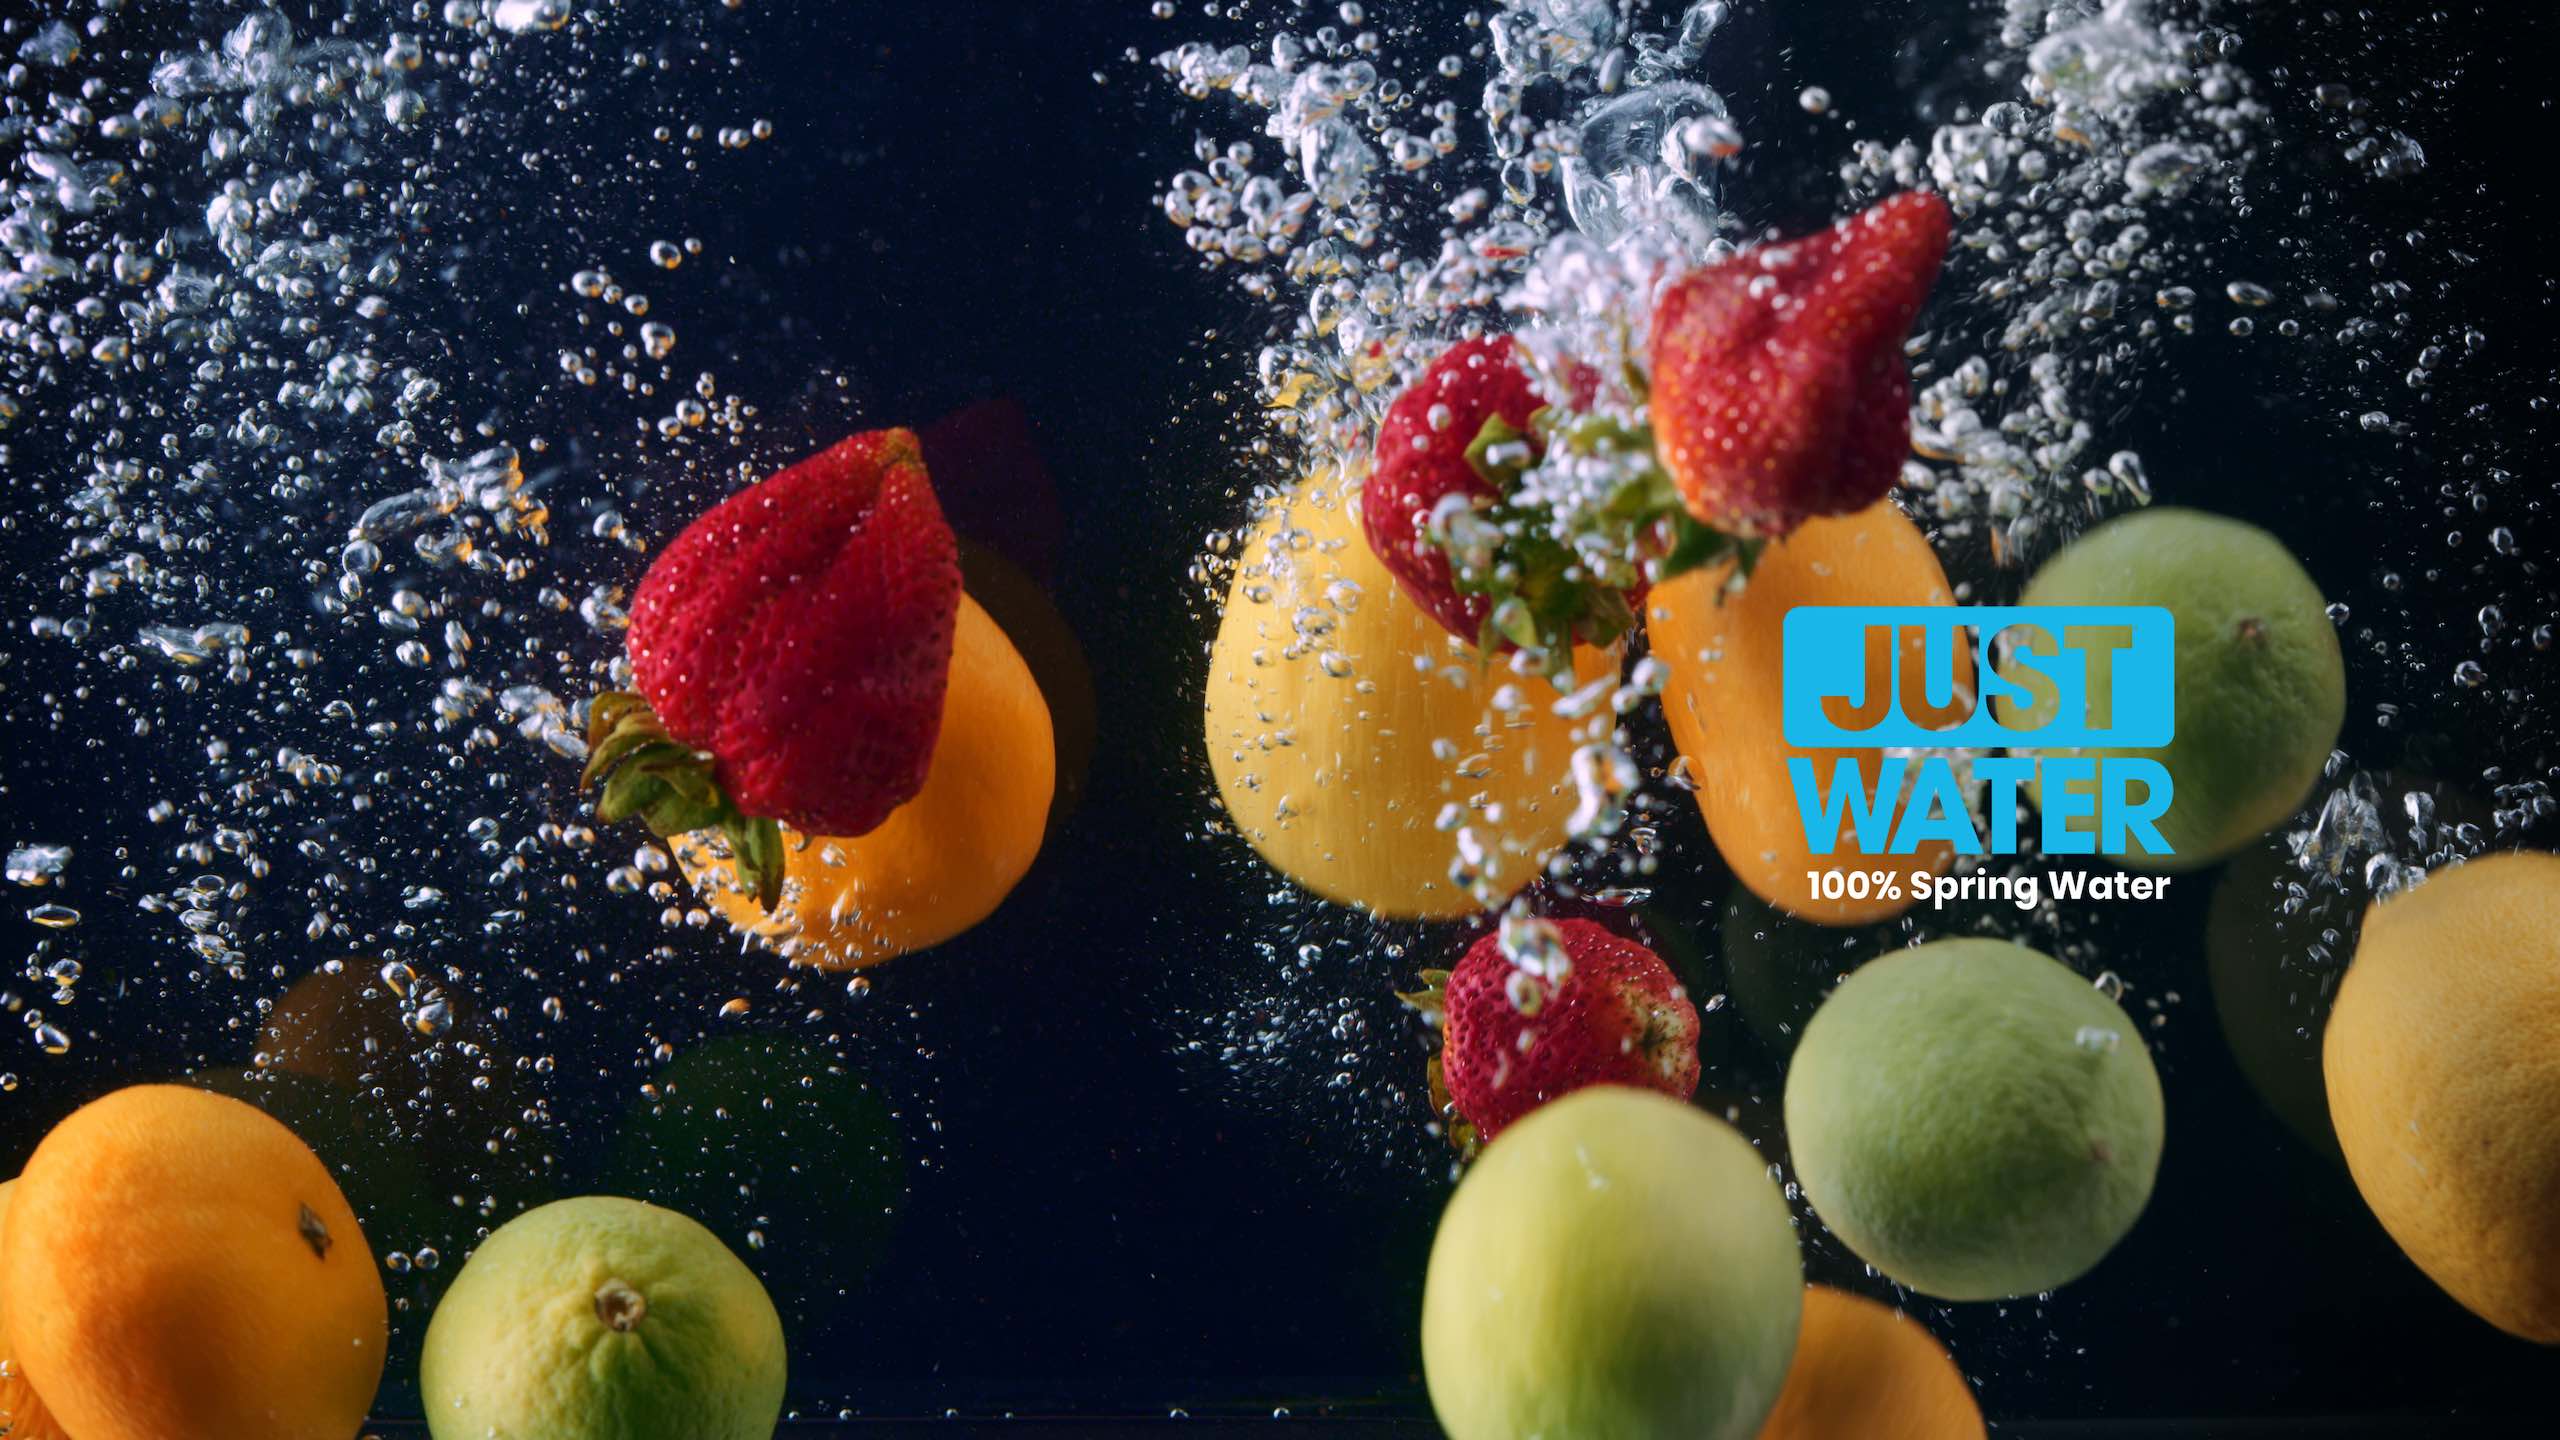 IU C&I Studios Portfolio Just water video ad Tangerines, strawberries and limes under water with bubbles. There is also a light blue and white logo